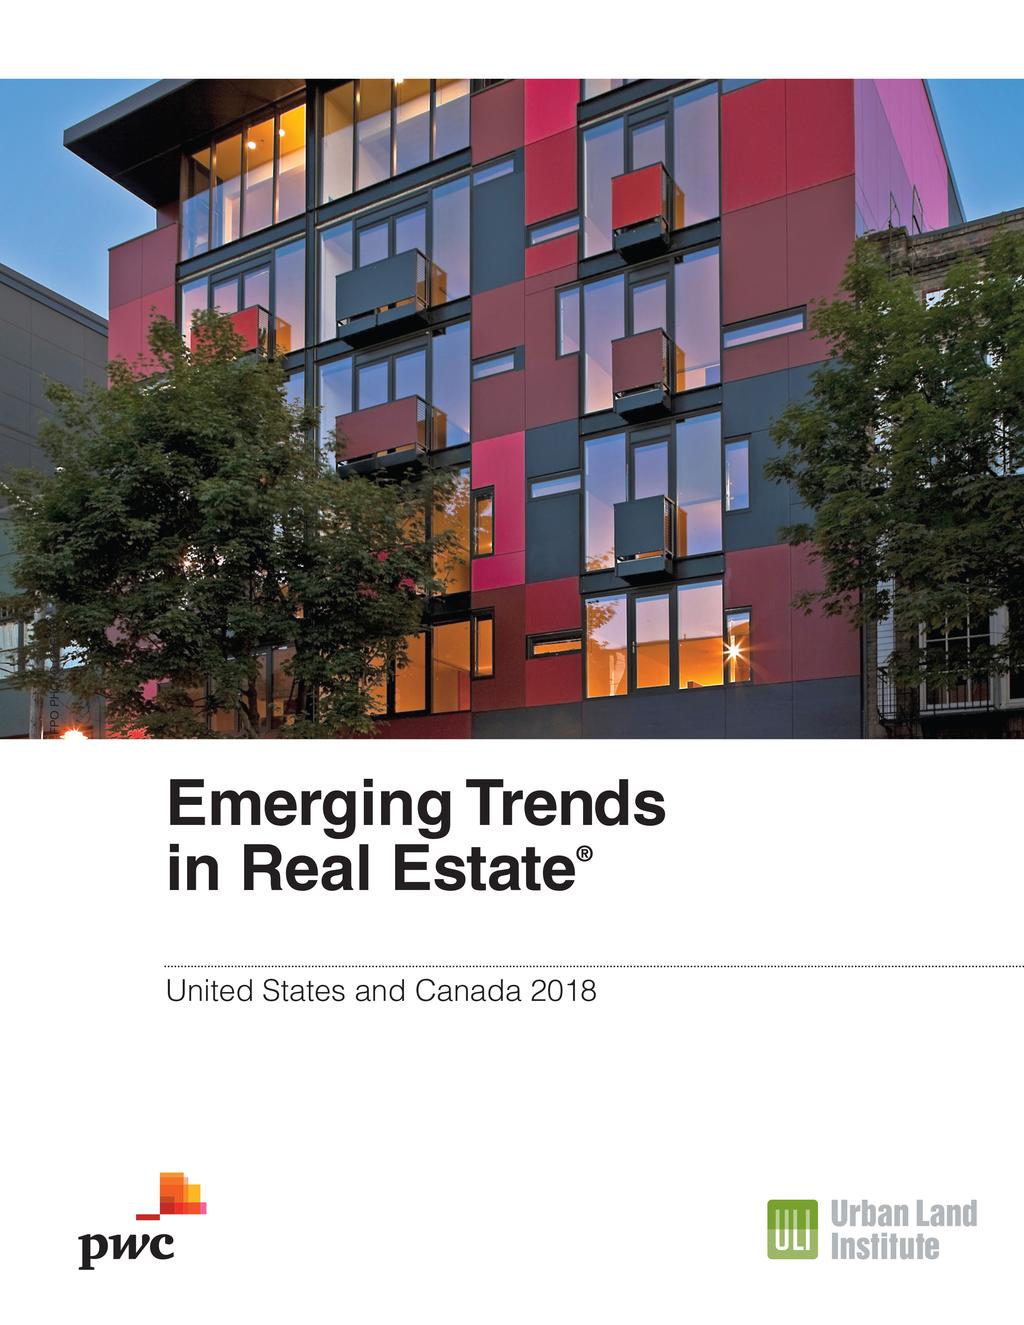 PwC ULI Outlook on Trends 39th